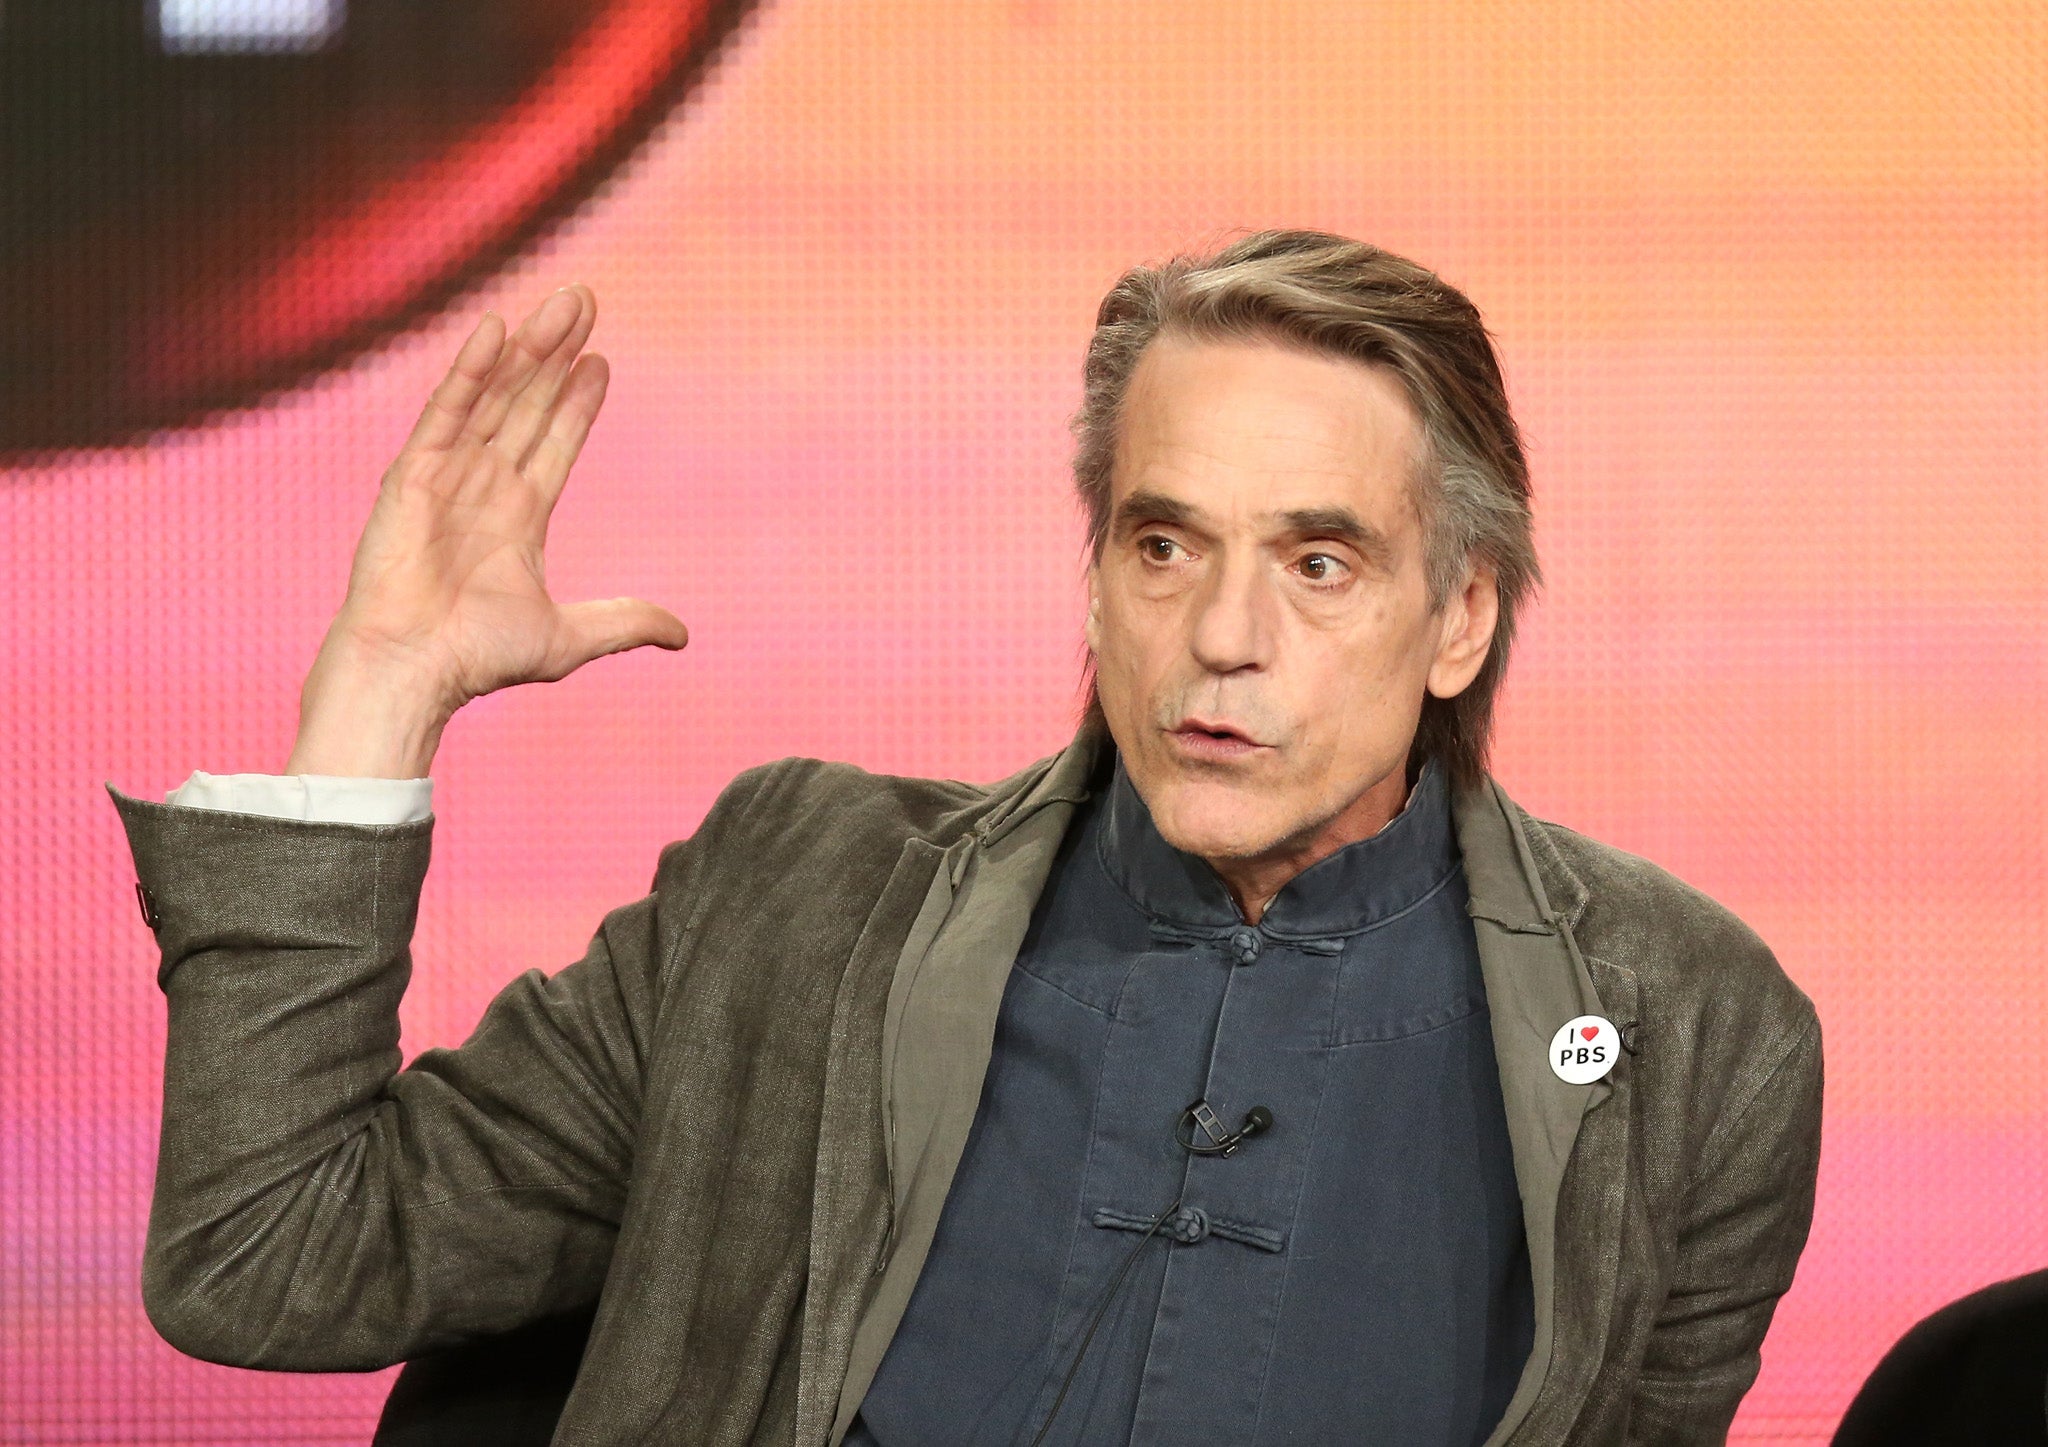 Jeremy Irons: 'I think we’re very robust as human beings. I had people when I was younger trying to feel me up. Older men. I just told them to get lost.'